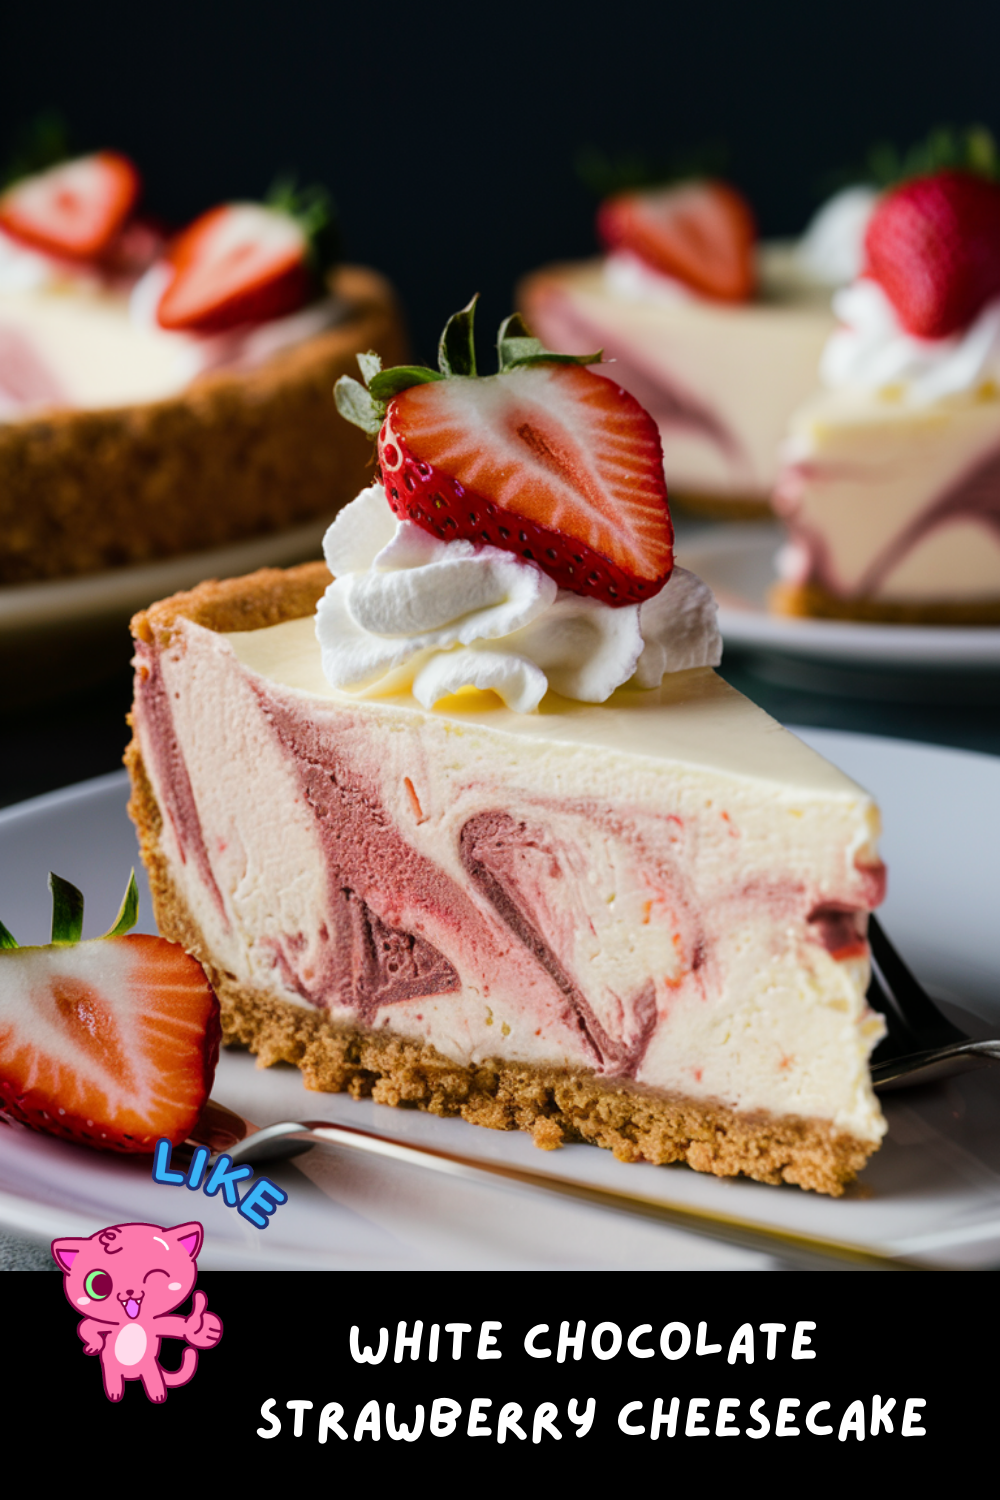 🍓🍰 Indulge in Sweetness! 🍰🍓 Hey, dessert lovers! If you're a fan of creamy cheesecake and luscious strawberries, you absolutely HAVE to try this White Chocolate Strawberry Cheesecake! 🍫🍓 With a buttery graham cracker crust, rich white chocolate filling, and a fresh strawberry topping, this dessert is pure bliss in every bite. Perfect for any special occasion or just to treat yourself. Check out the recipe below and enjoy! 🌟👇